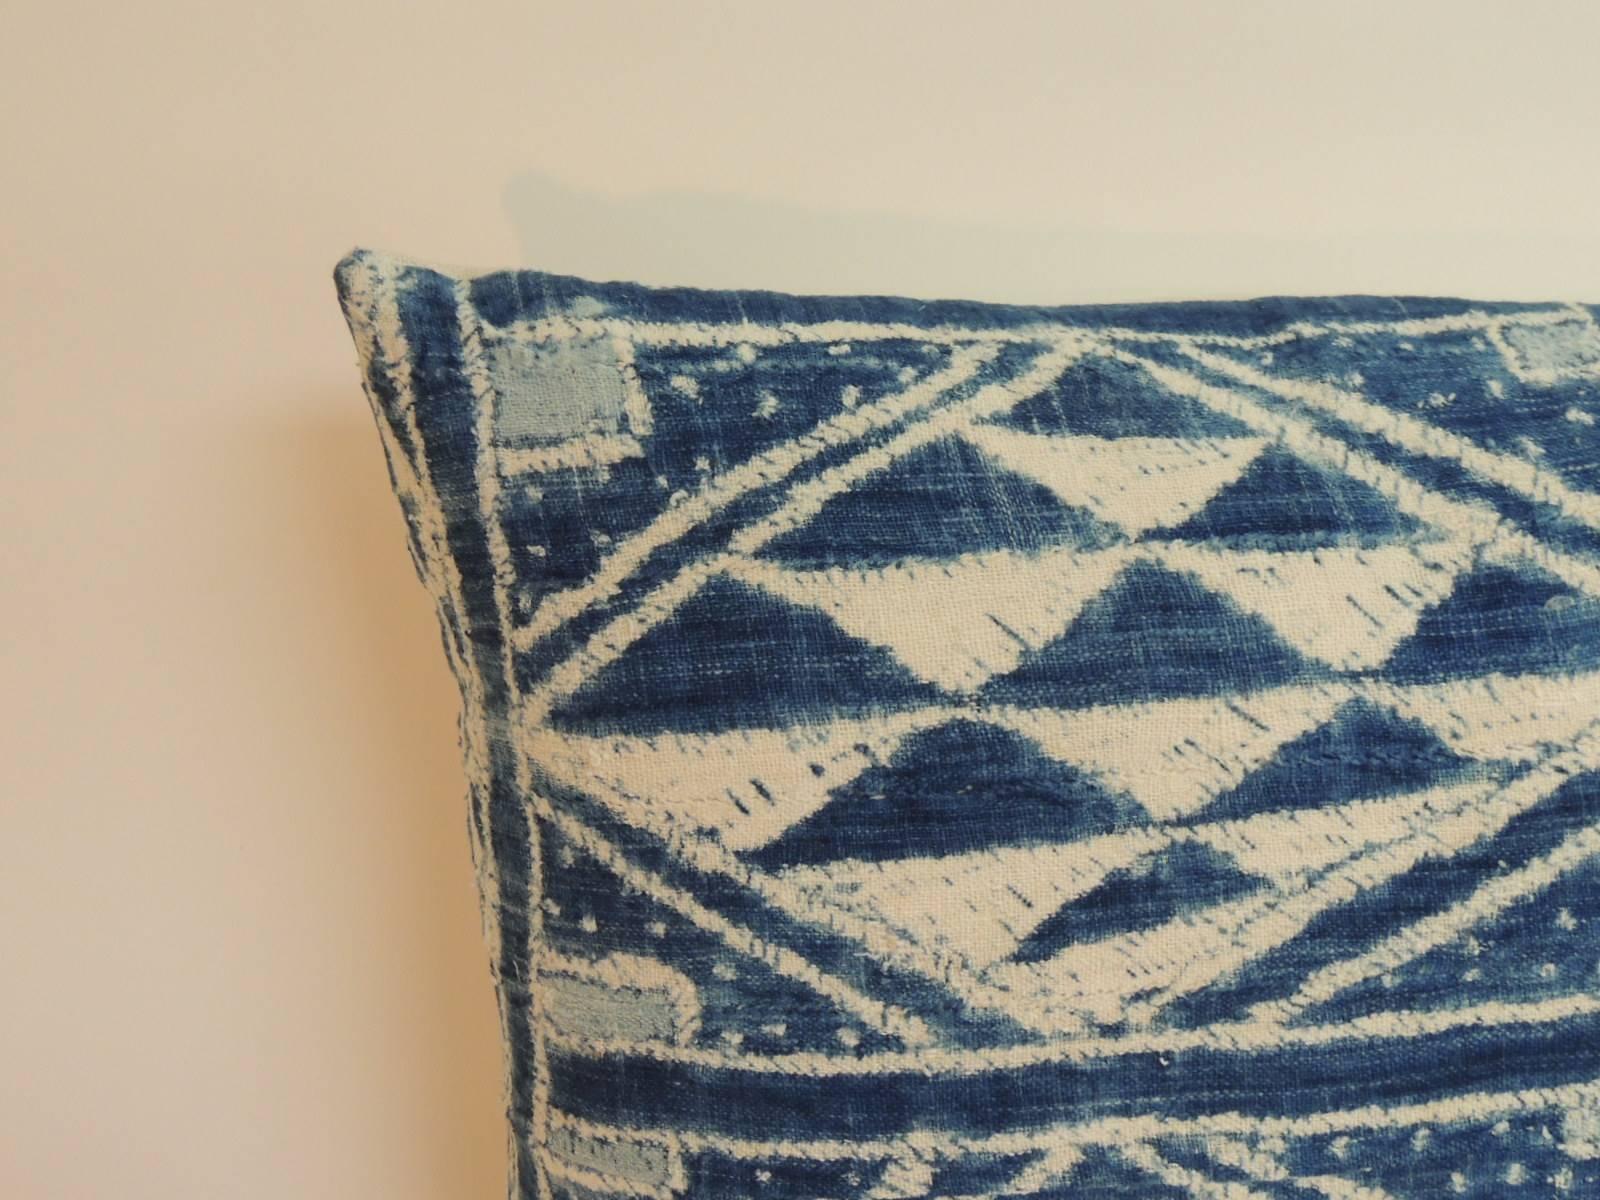 Large blue and white “Ndop” woven African woven decorative bolster pillow with traditional tribal designs and backed with textured white cotton fabric. Decorative pillow designed and handcrafted in the USA. Hand-stitched closure (no zipper.)